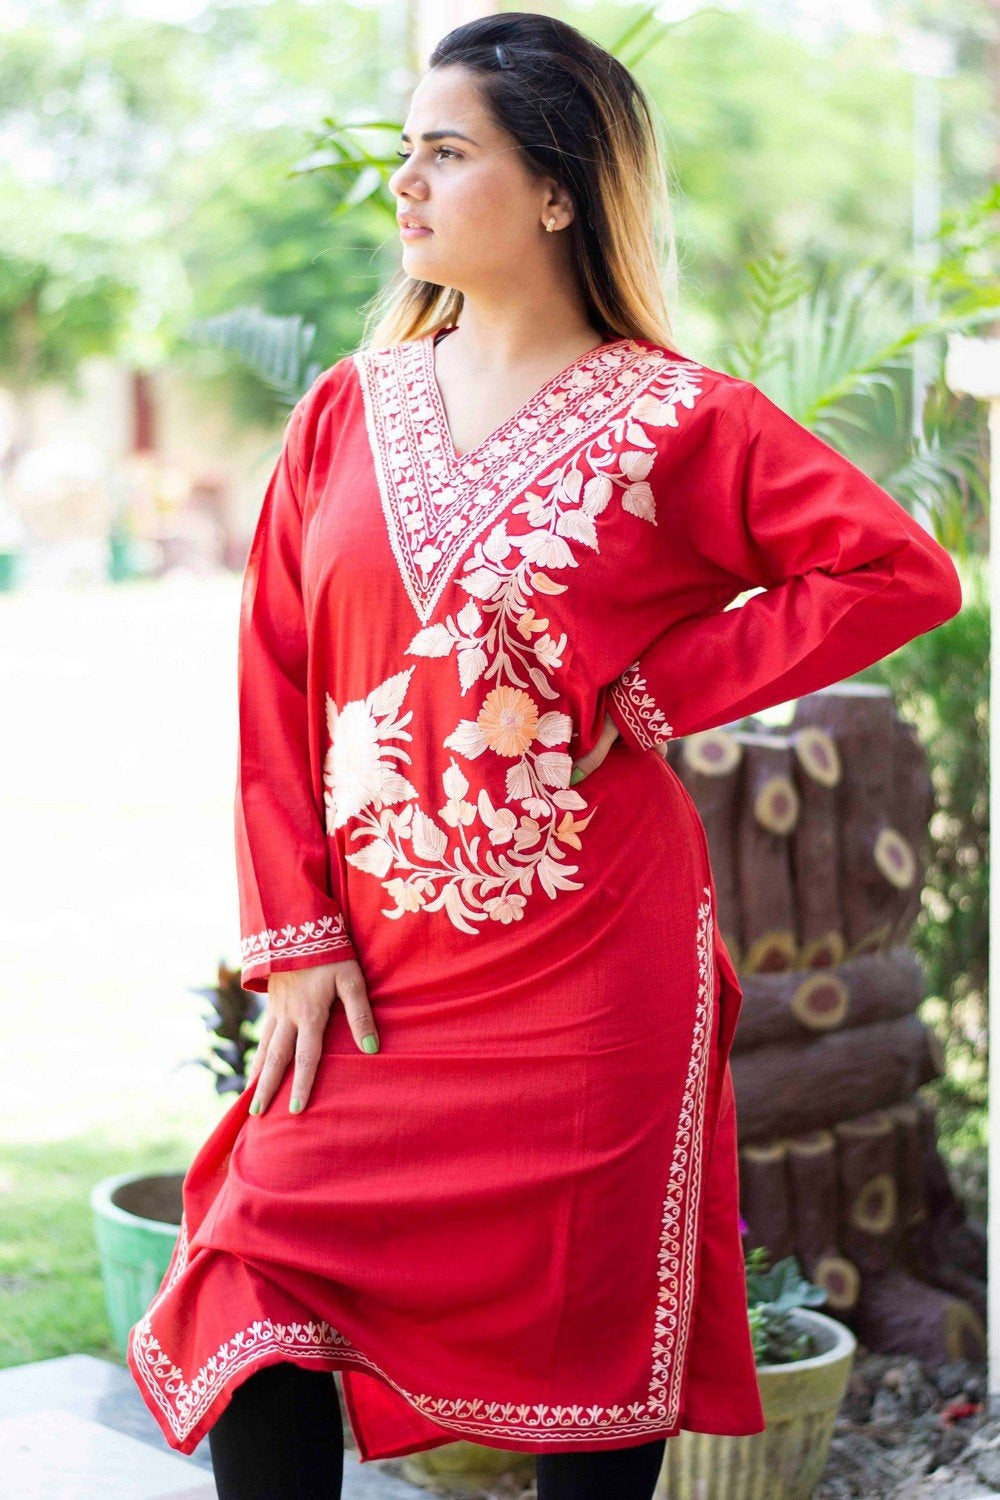 Red Colour Cotton Kurti With Beautiful Aari Embroidery Gives